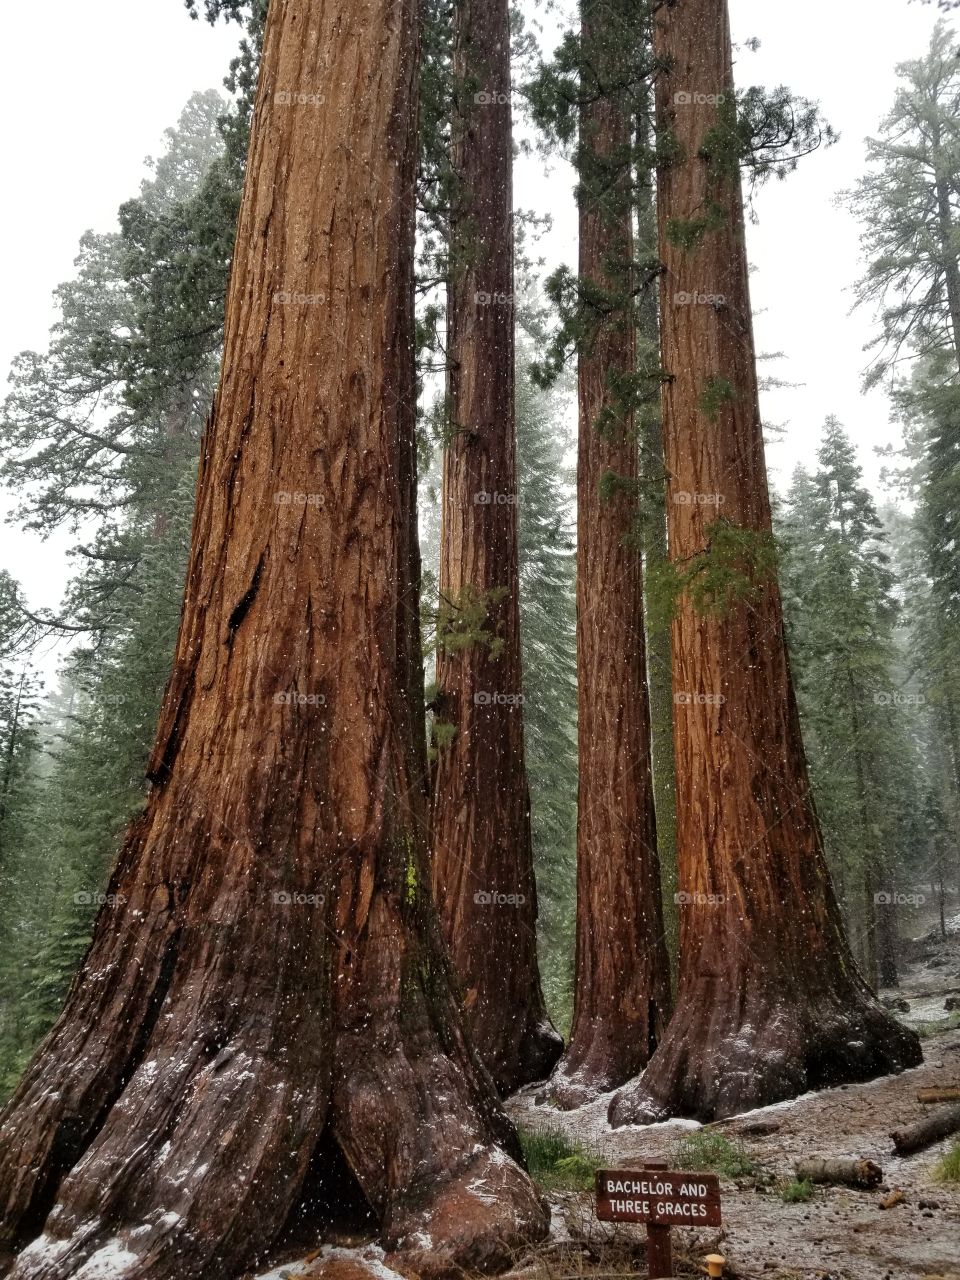 The Bachelor and Three Grace's. Mariposa Grove